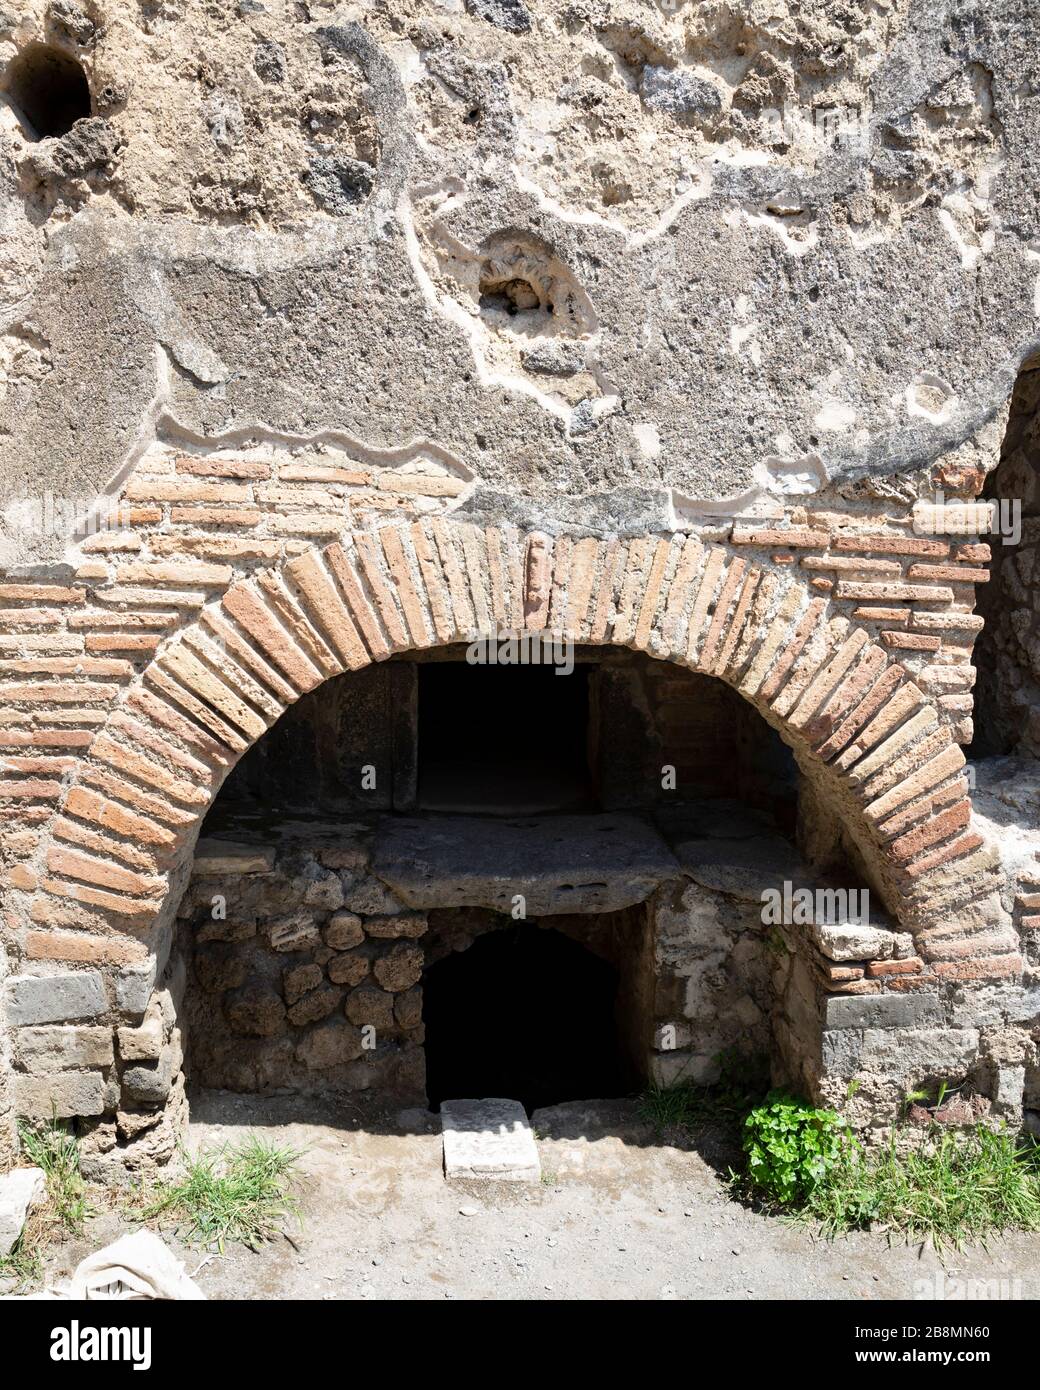 The remains of an ancient Roman brick oven, Pompeii, Campania, Italy. Stock Photo